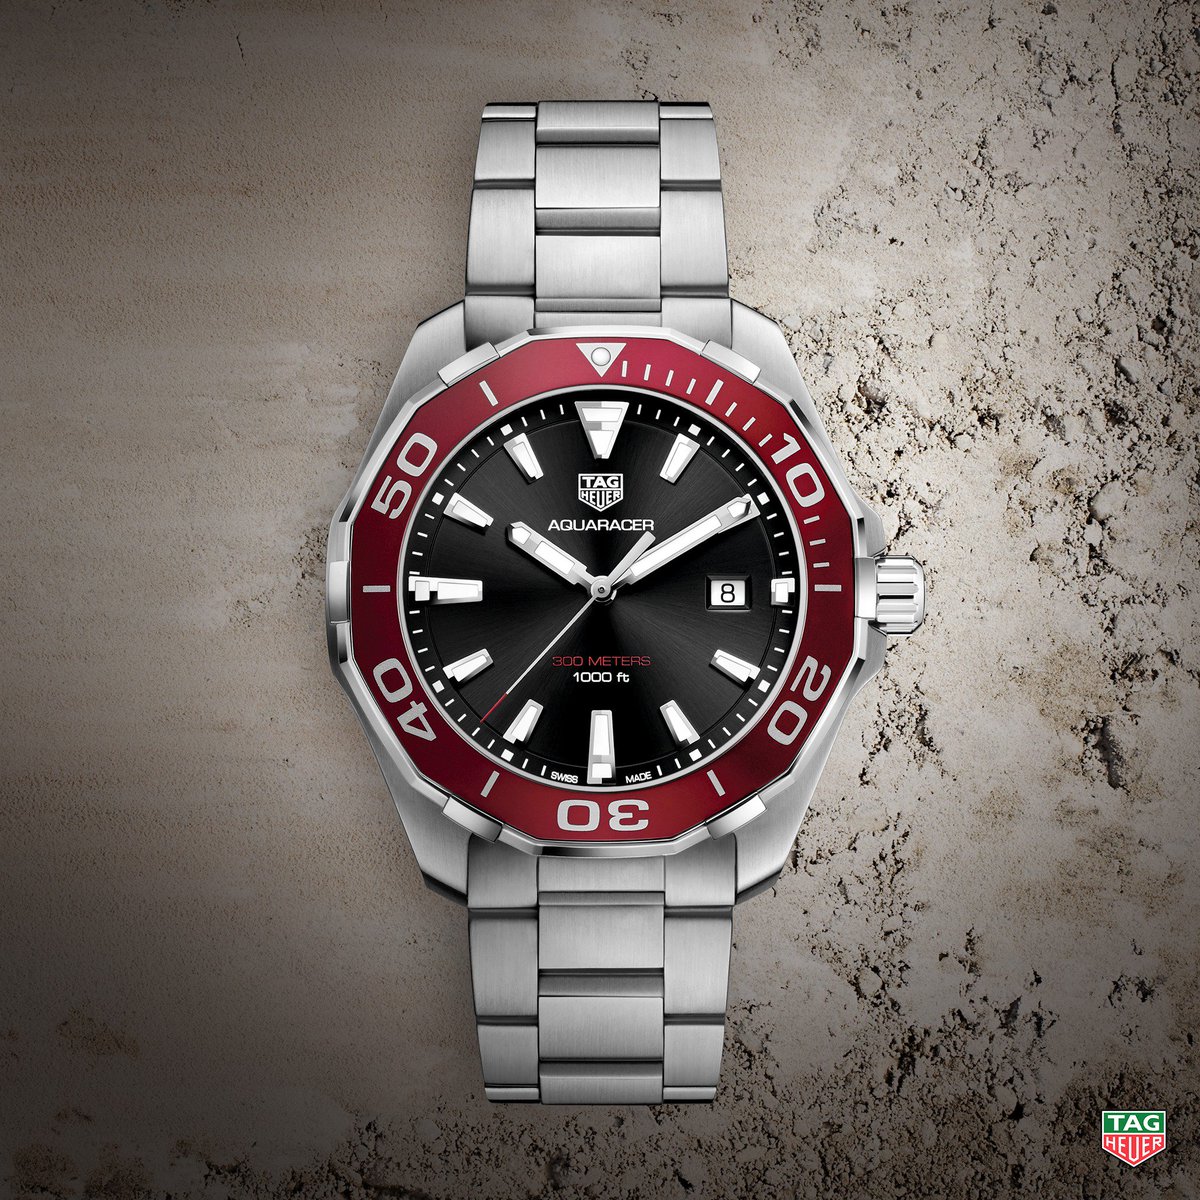 TAG on Twitter: "Introducing Heuer Aquaracer Red Bezel. Coming very soon... #DontCrackUnderPressure More at: https://t.co/XeVuhXuQrM https://t.co/B69VFR84G0" / Twitter